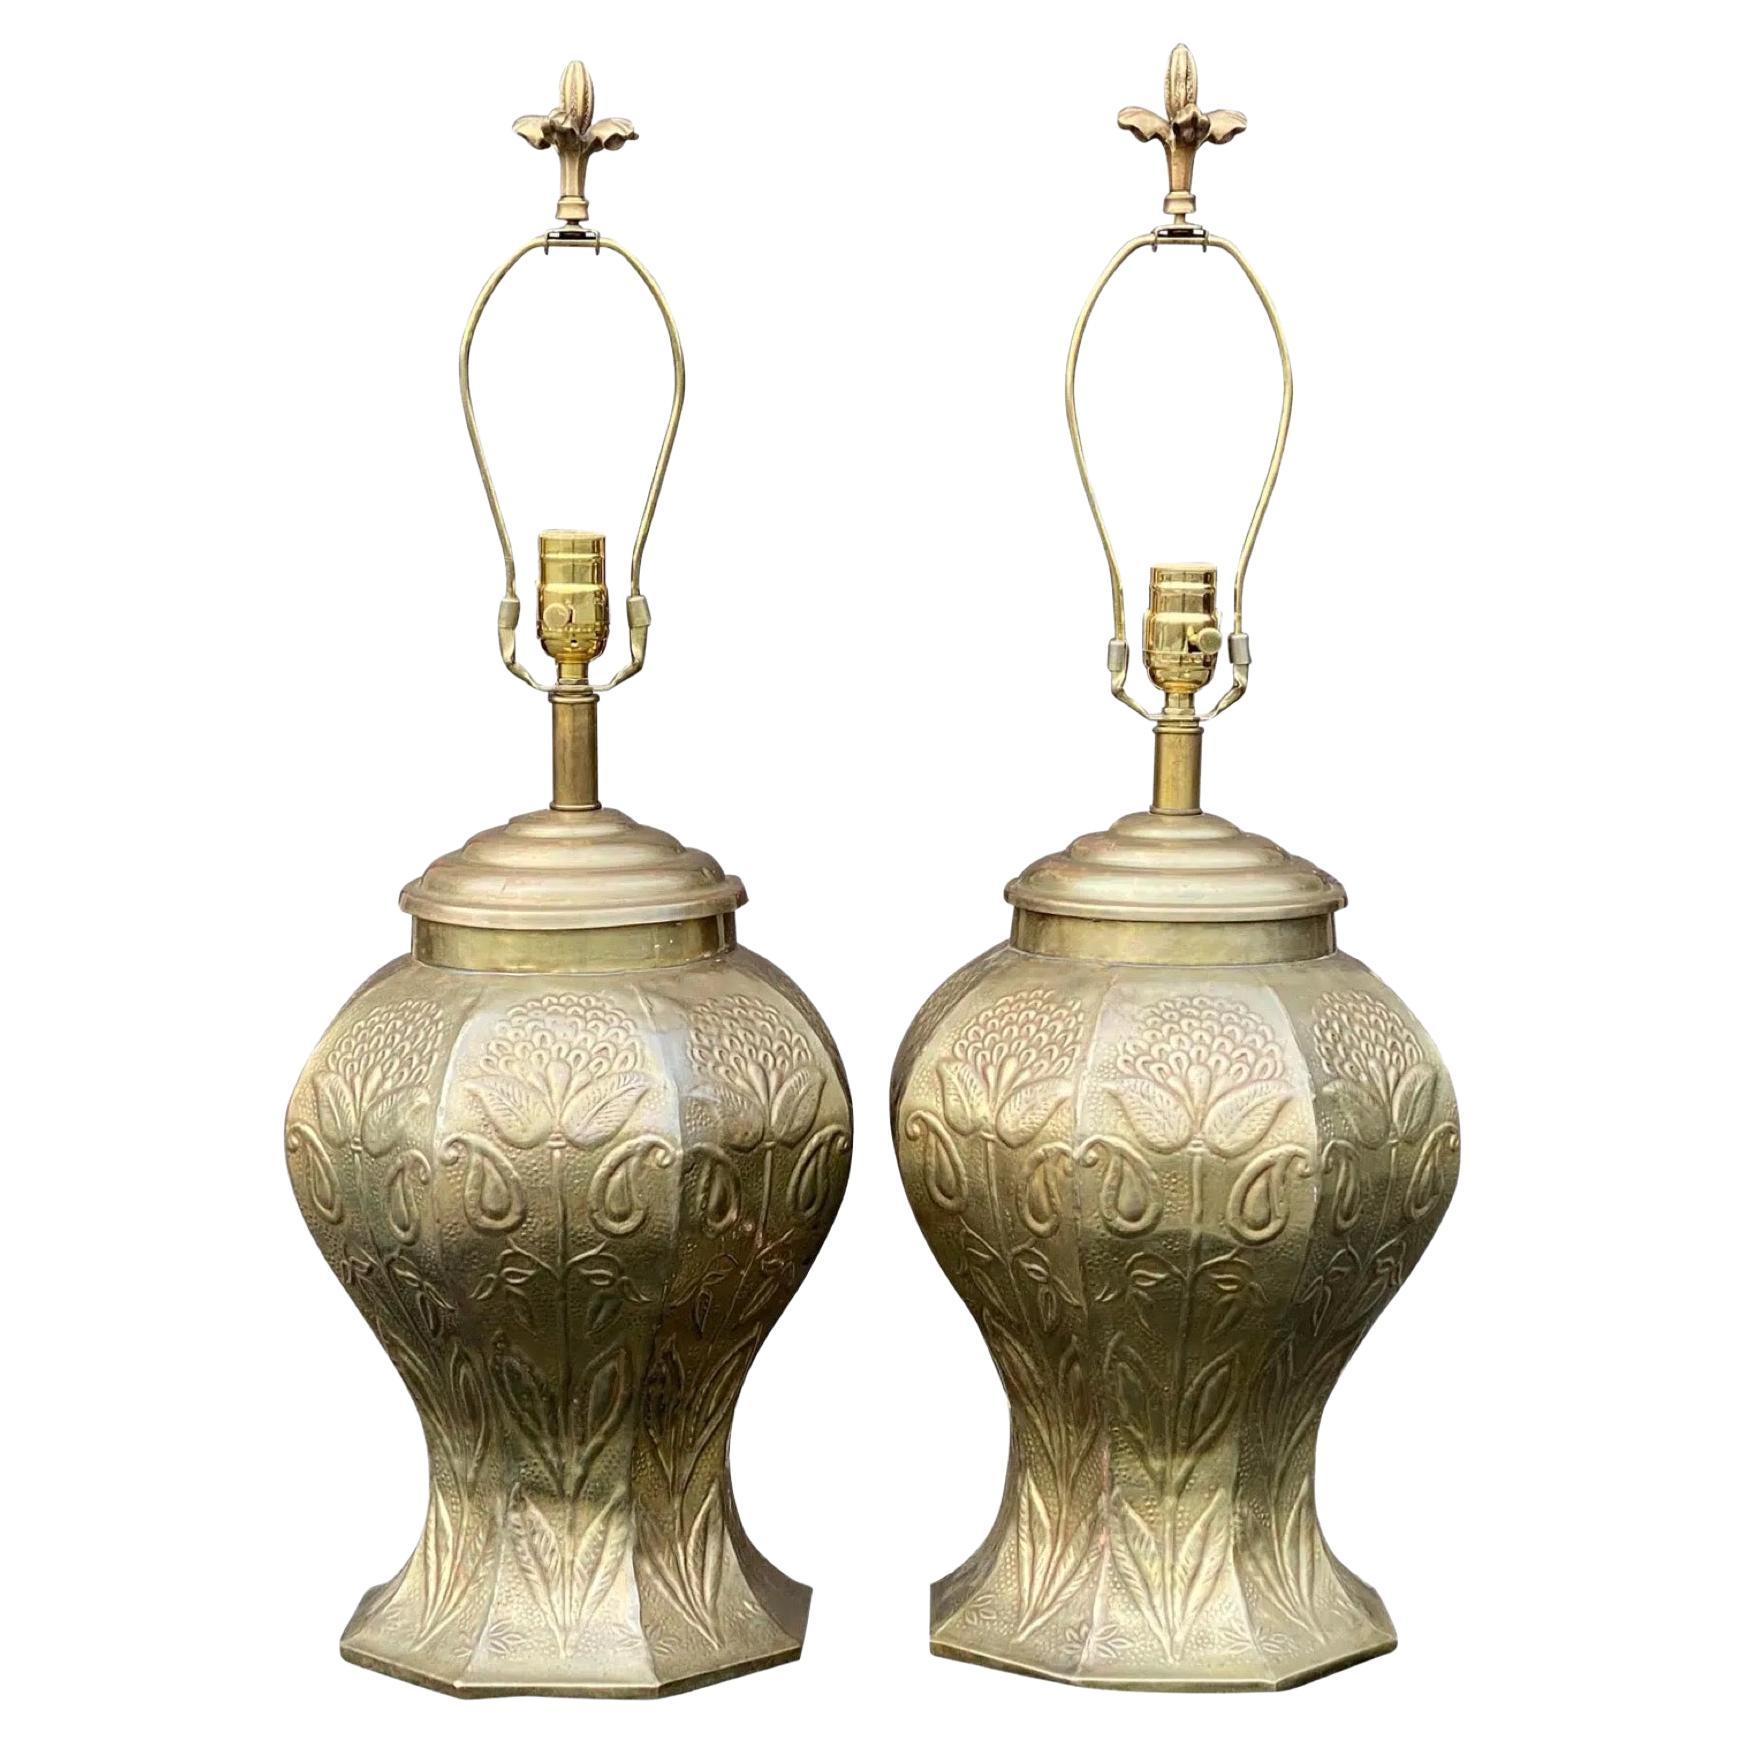 Pair John Richard Hammered Brass Table Lamps With Floral Finials For Sale